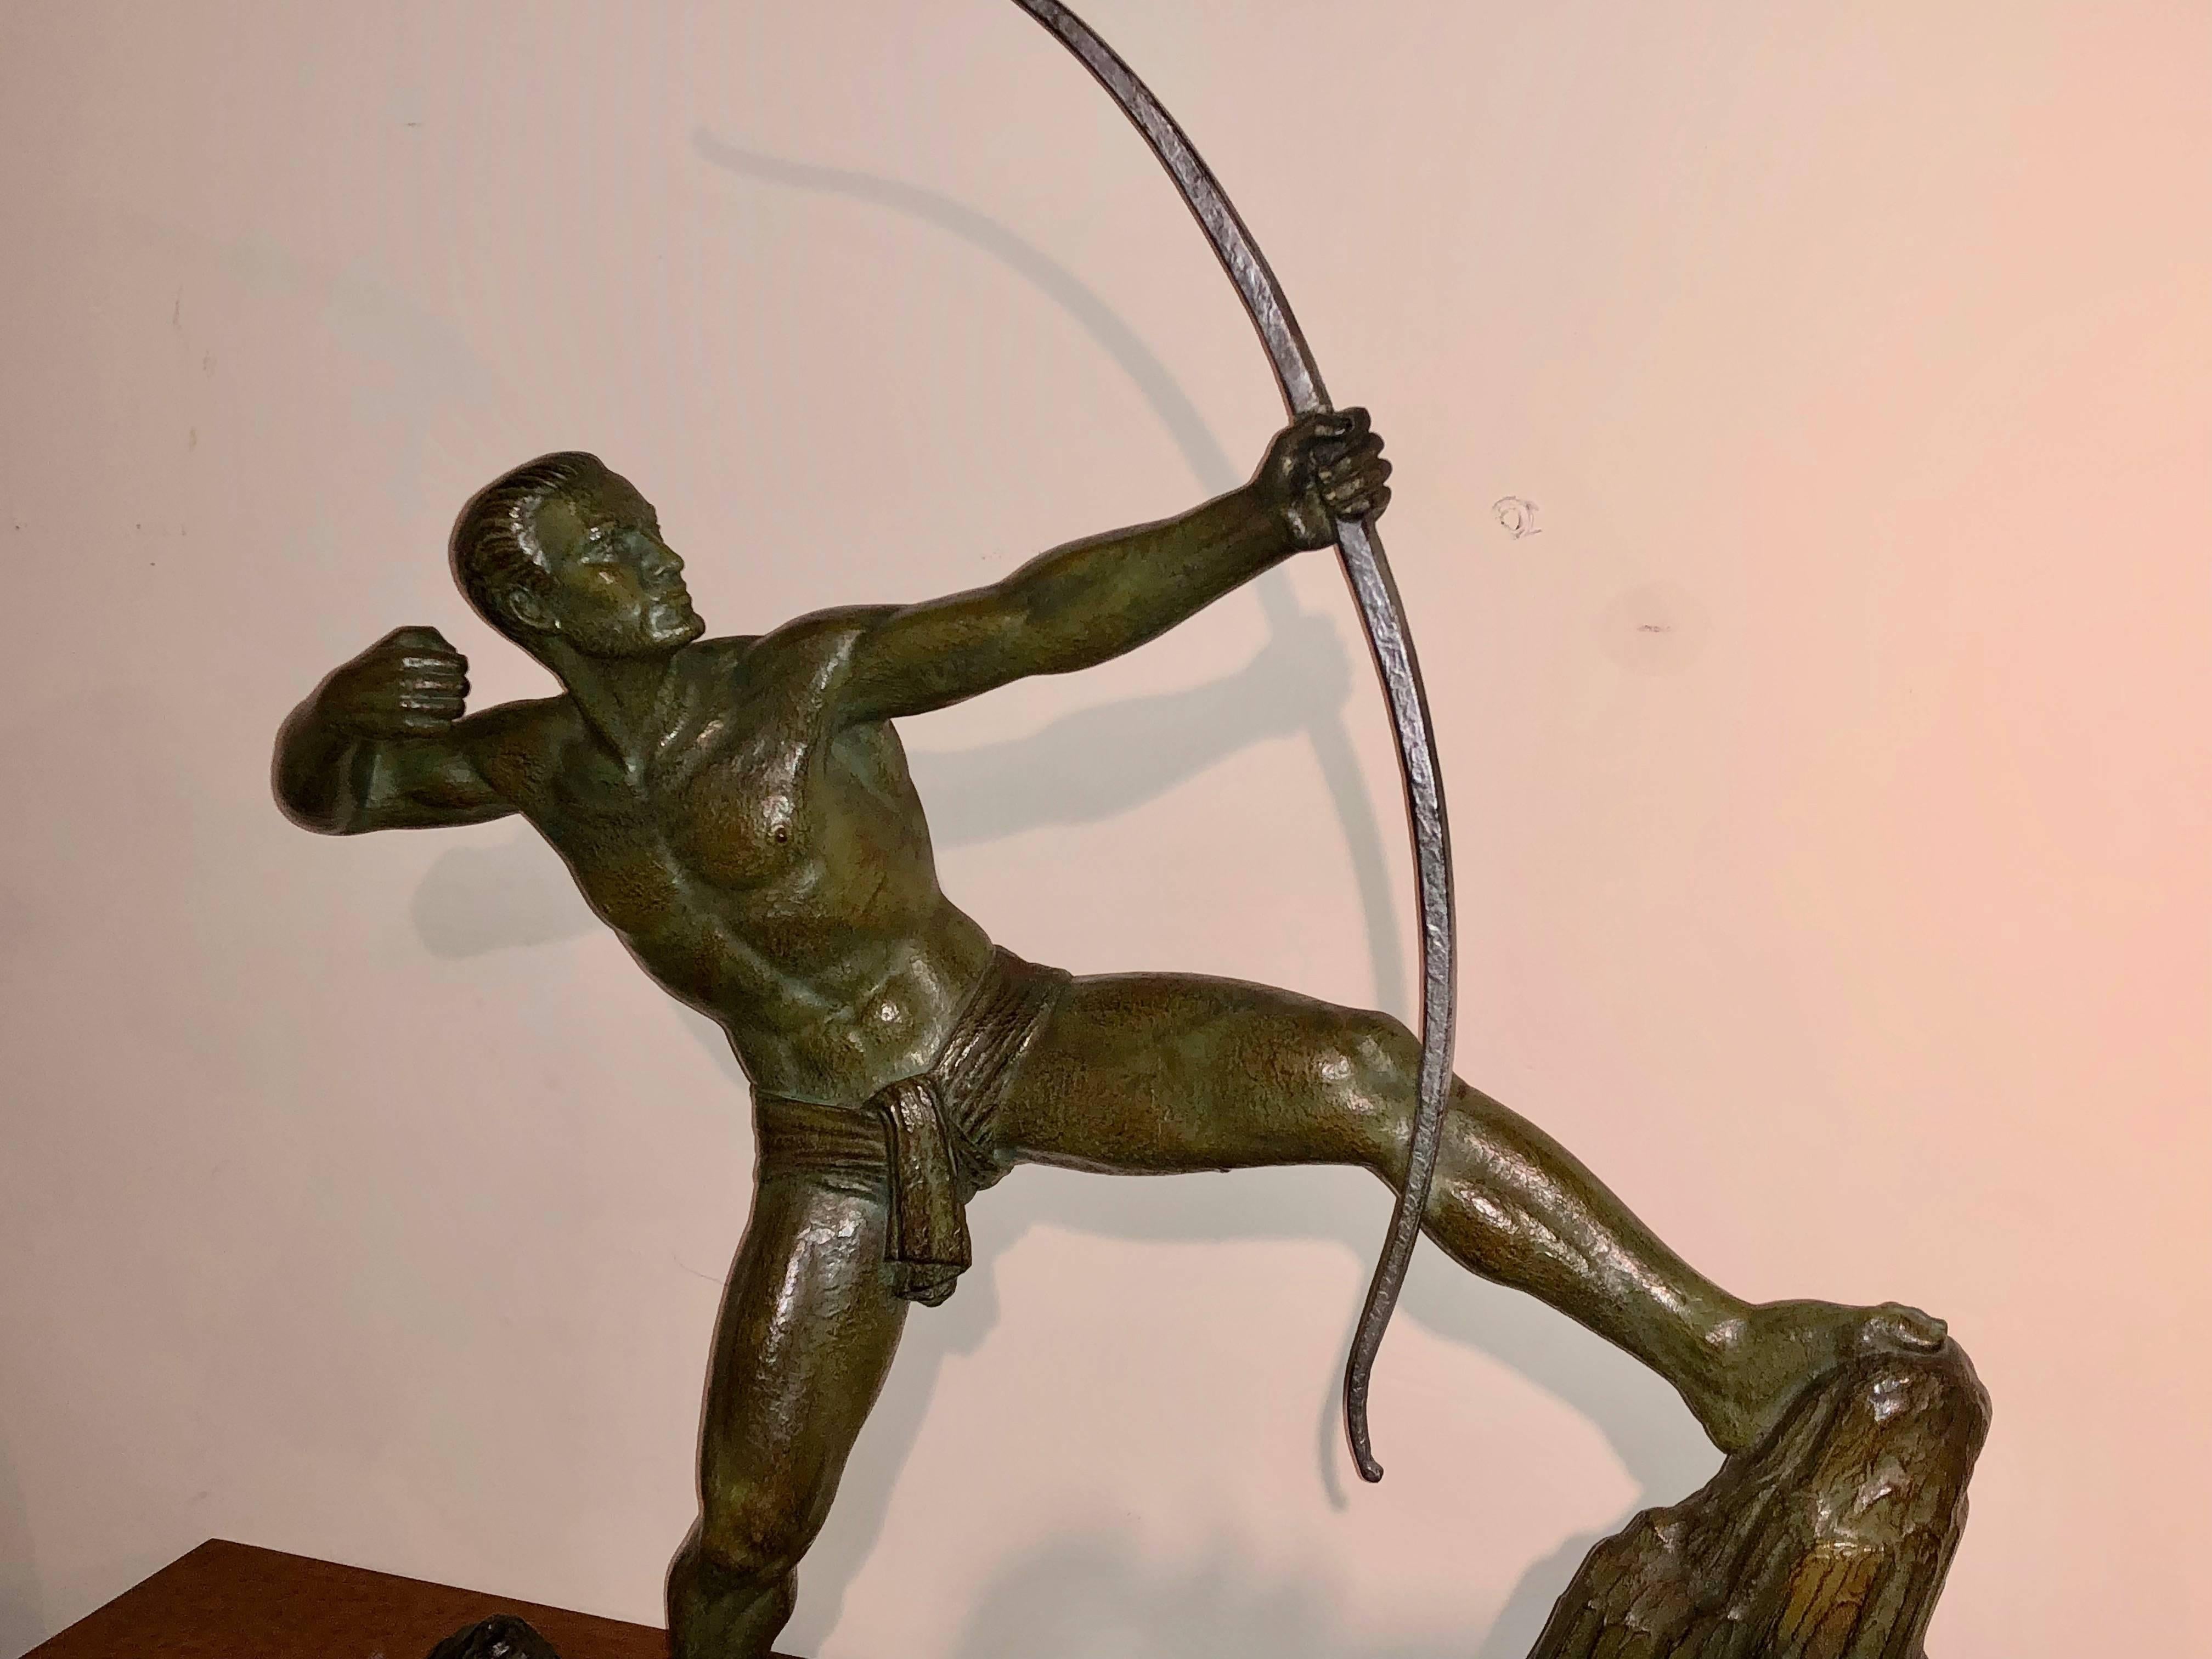 Master sculptor Lucien Gilbert with his famous “The Archer” sculpture embraces the finest in French bronze detailing of the period. The size, quality and weight of this piece is impressive. The verdigris patina has a unique character and the